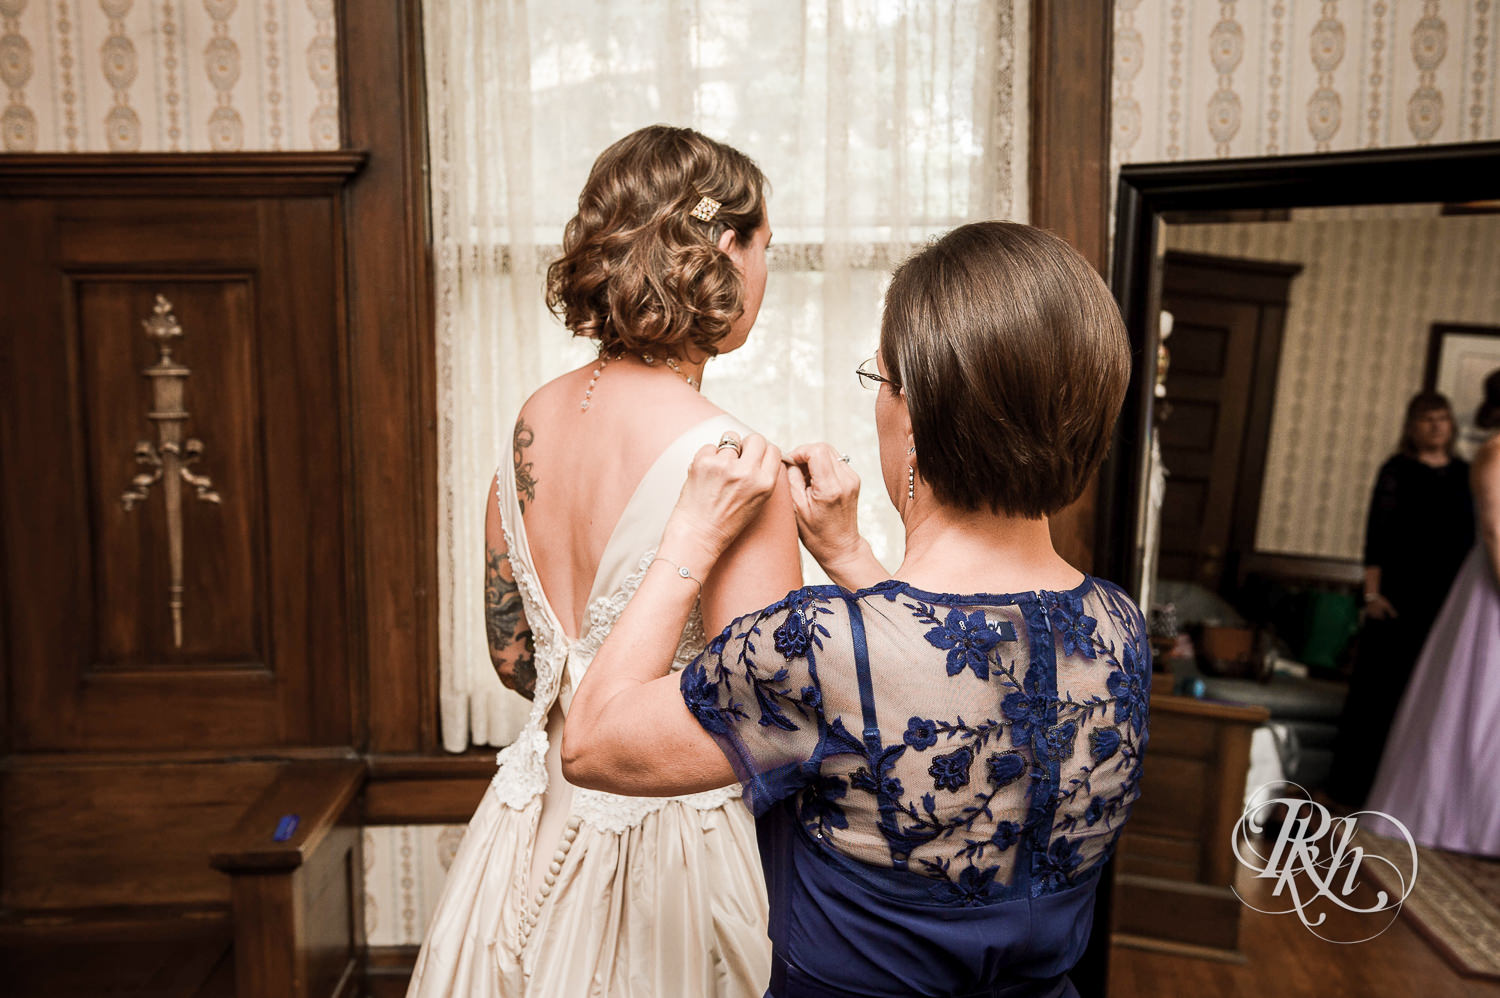 Bride getting buttoned into wedding dress at Summit Manor Reception House in Saint Paul, Minnesota.